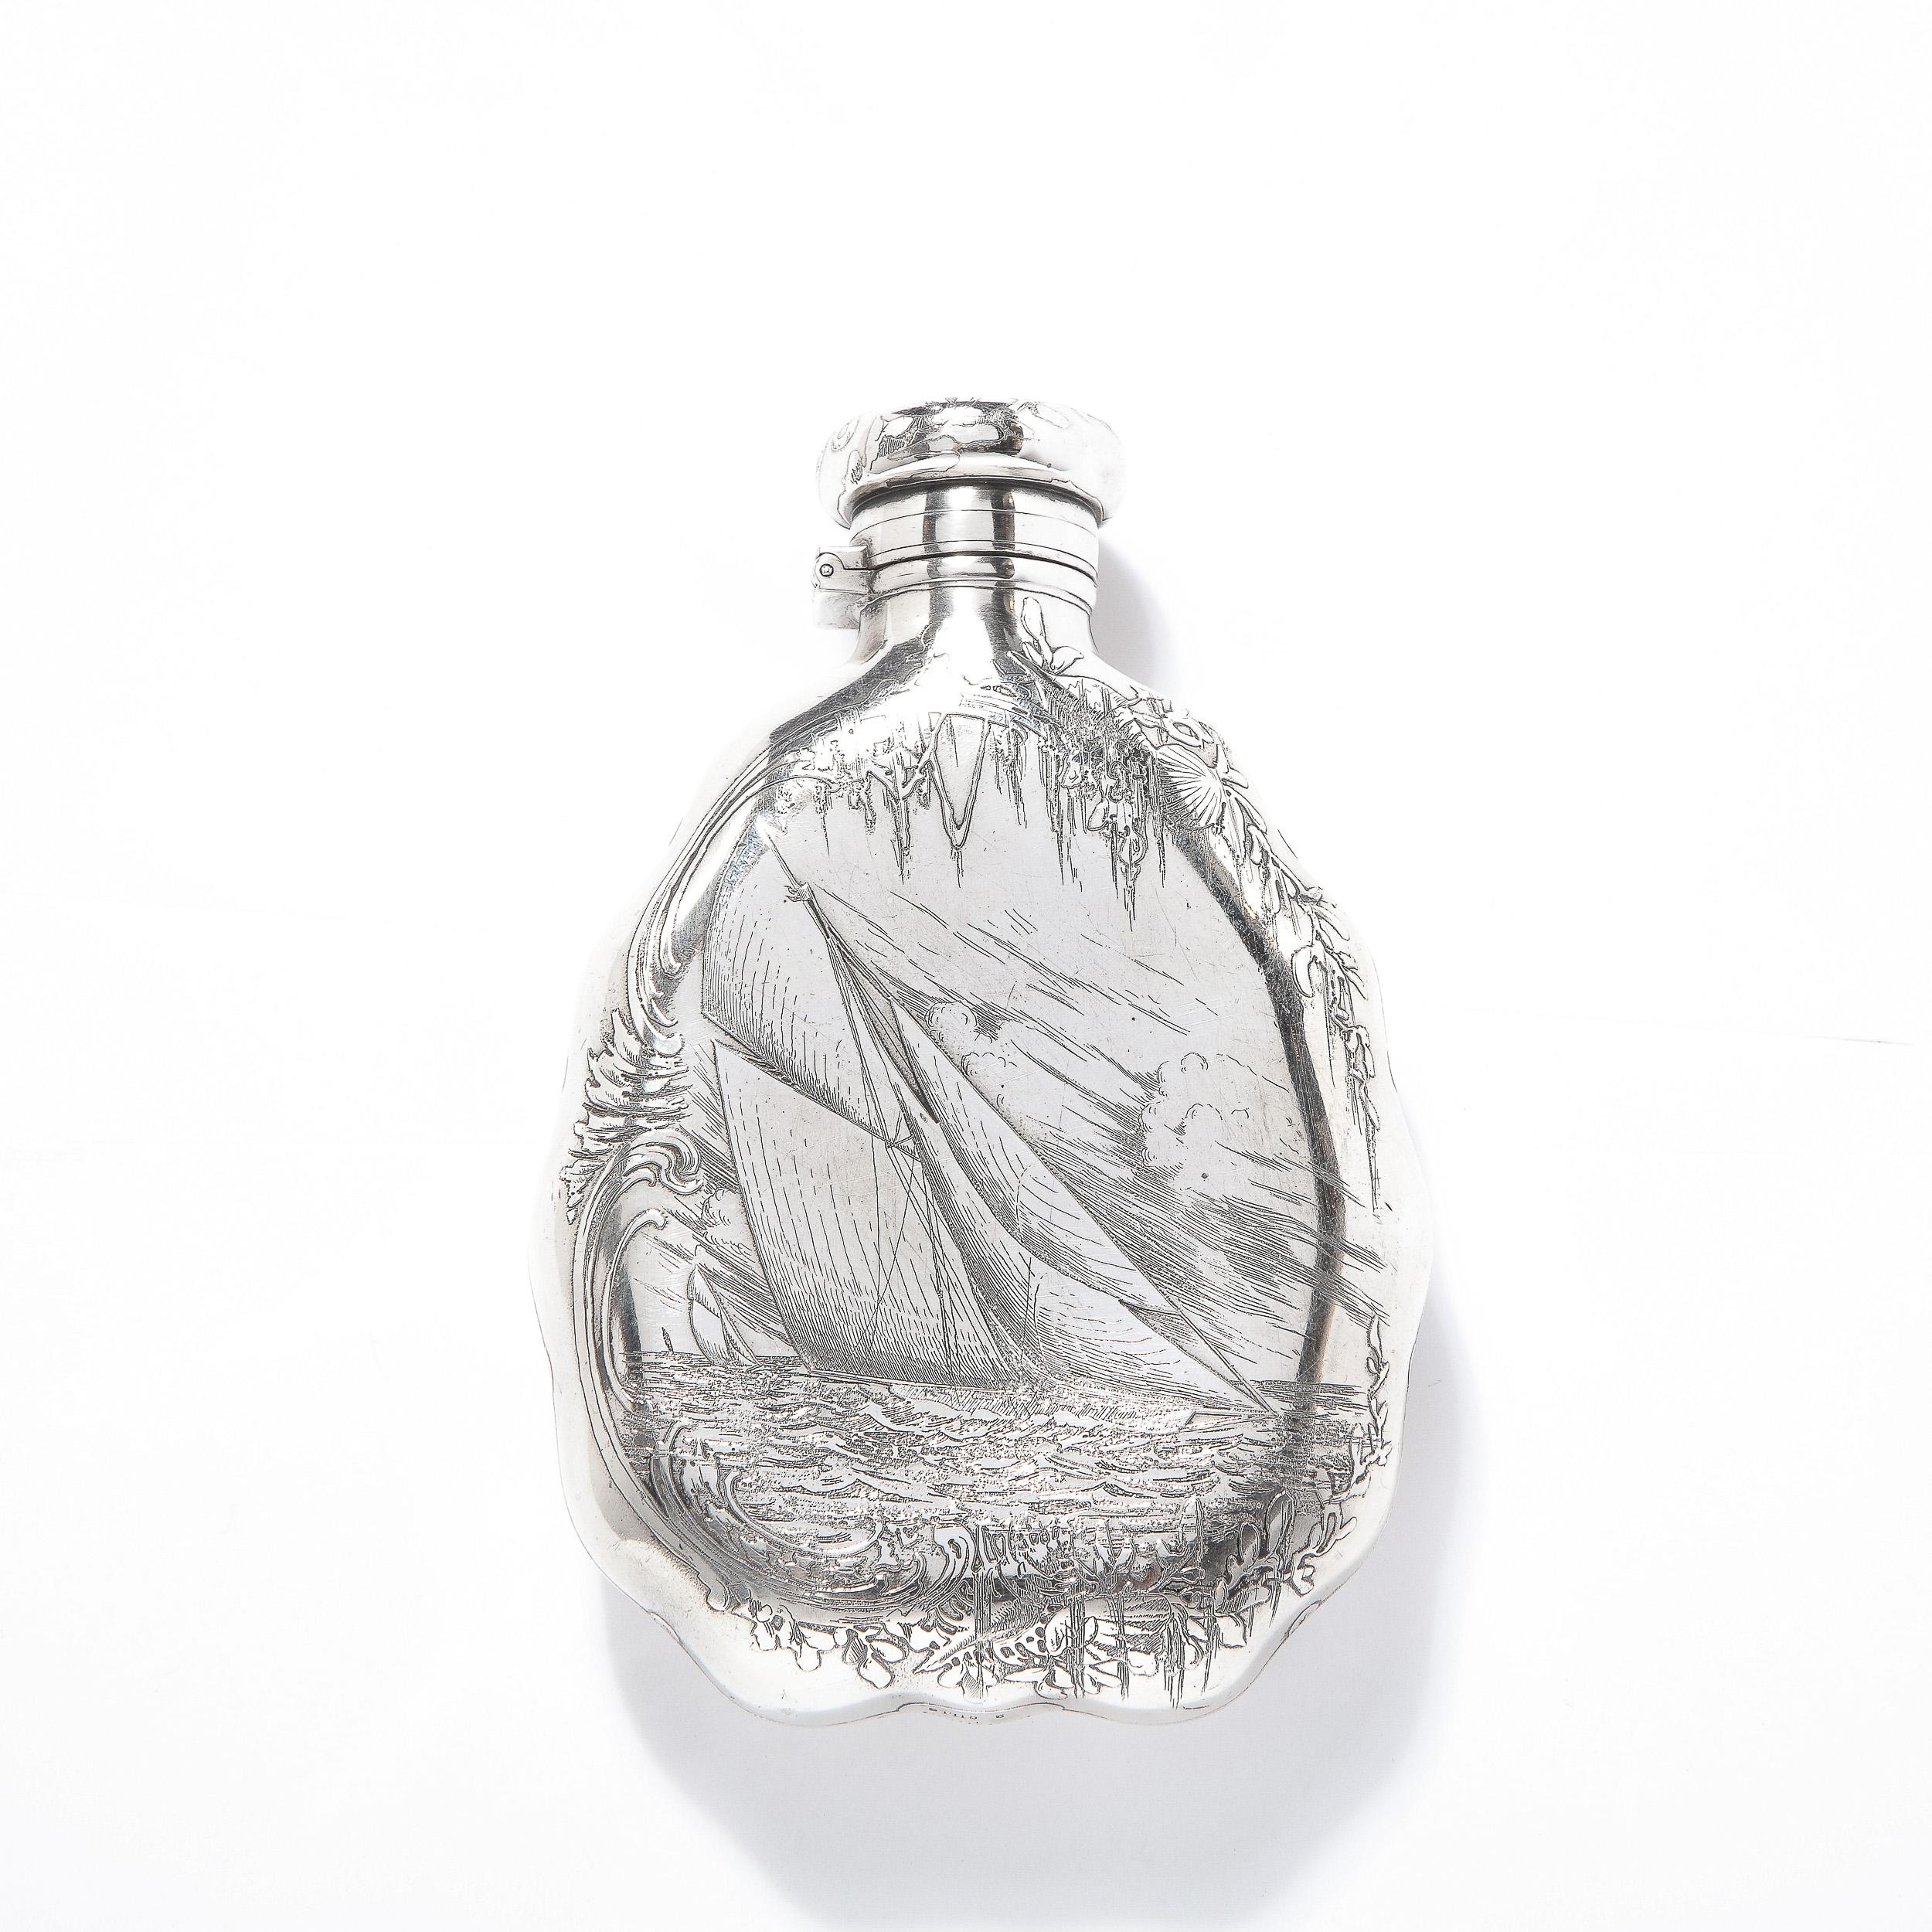 Late 19th Century Sterling Silver 19th Century Tiffany & Co. Nautical Flask for Americas Cup